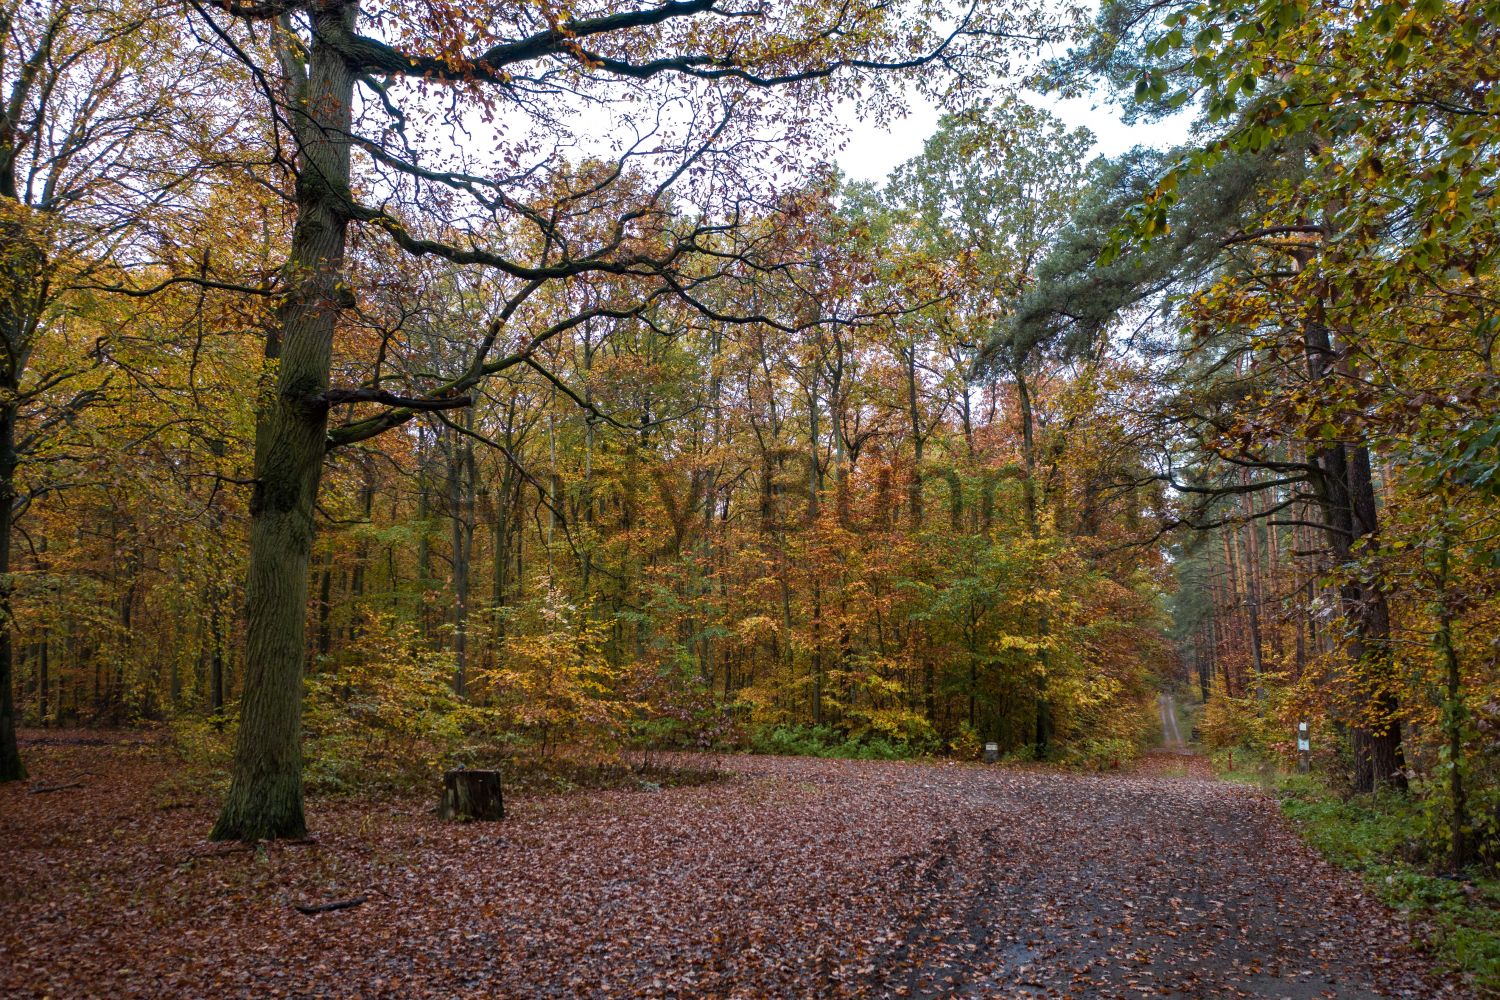 Preview ab201101_Herbst_0009.jpg